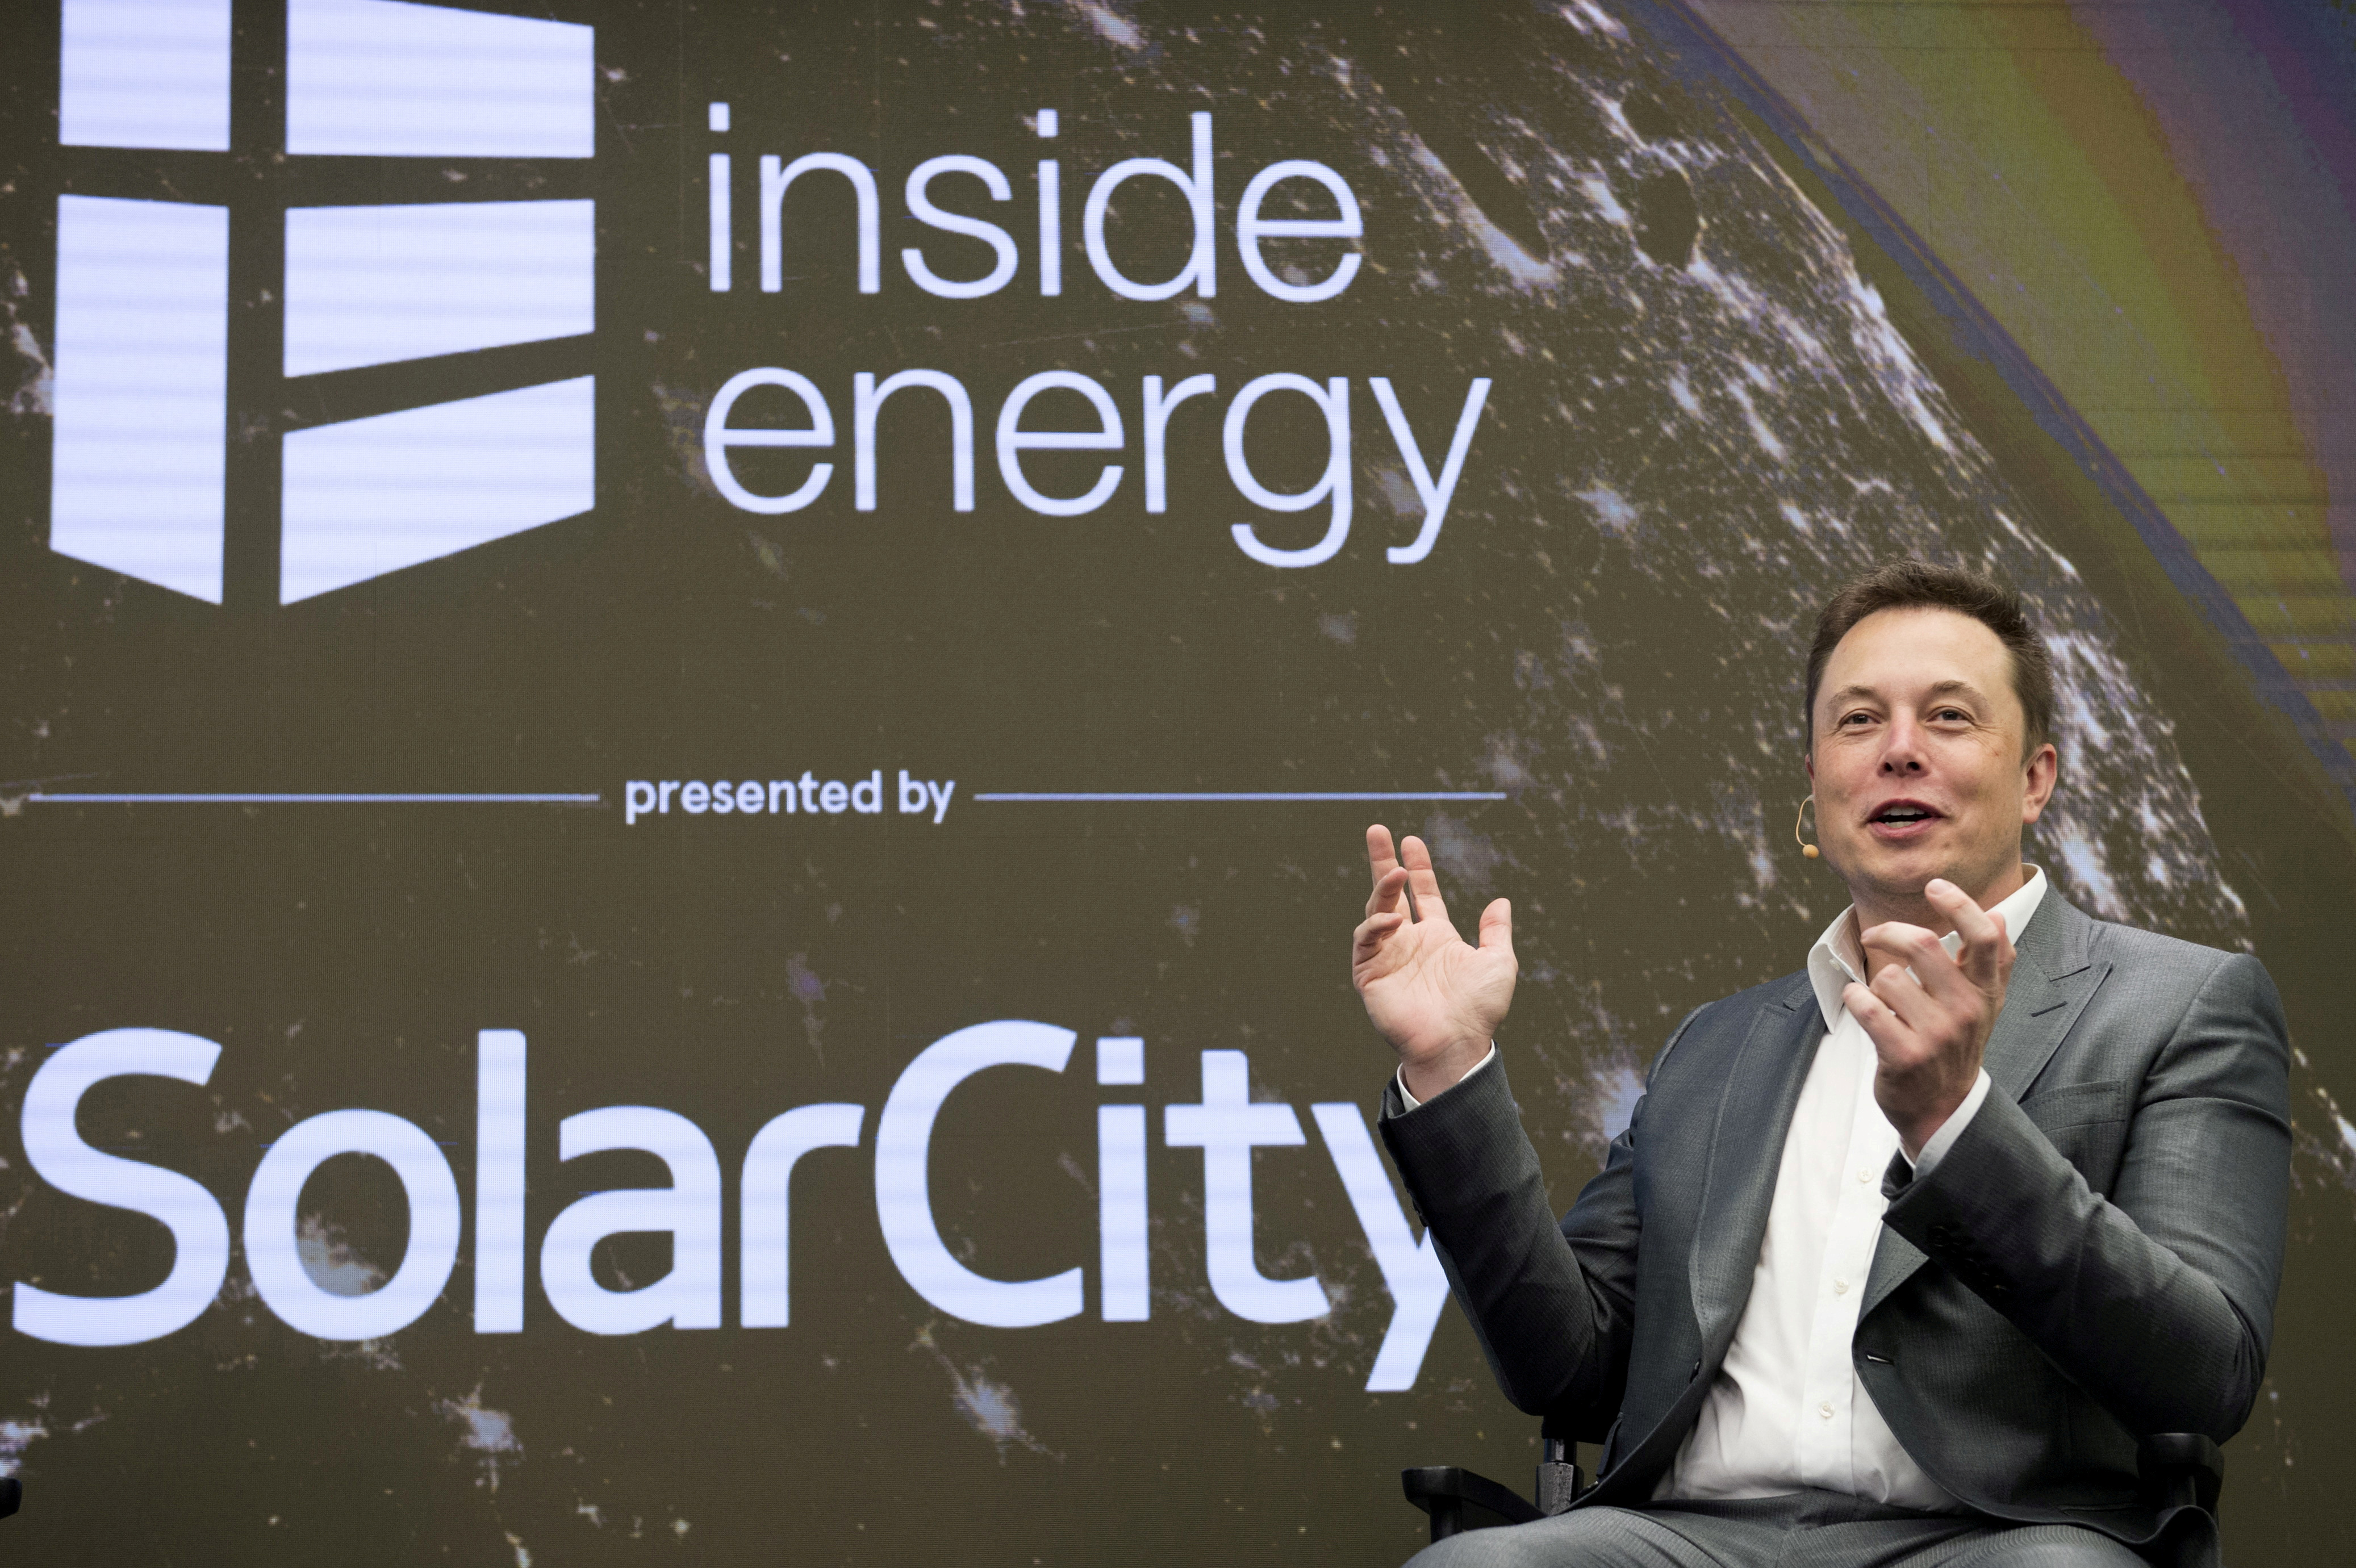 Elon Musk, Chairman of SolarCity and CEO of Tesla Motors, speaks at SolarCityÕs Inside Energy Summit in Midtown, New York